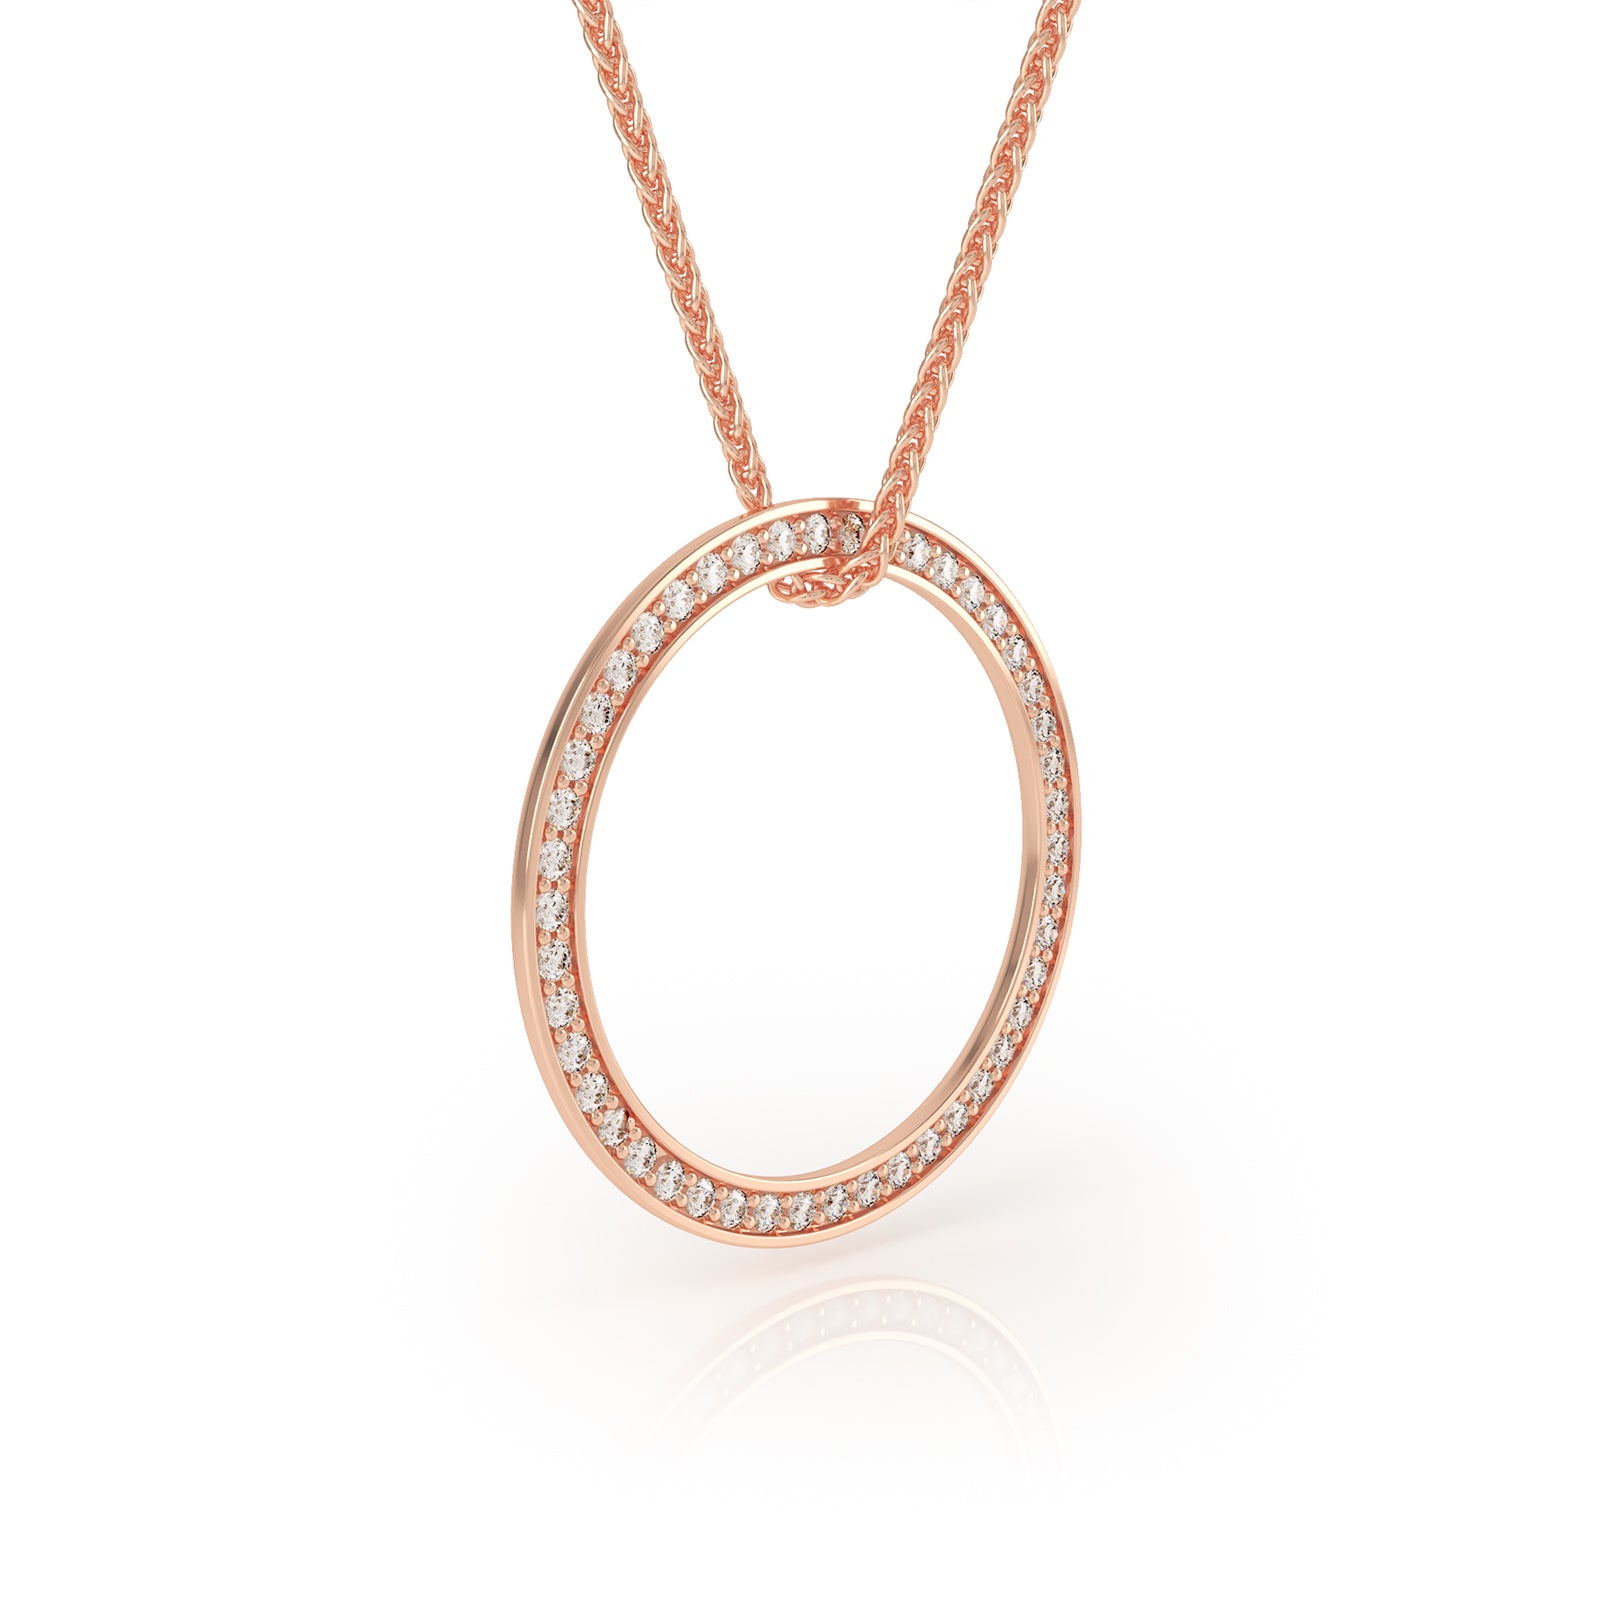 Pandora Signature 14k Rose Gold-Plated Two-tone Intertwined Circles Necklace  - Pandora Jewellery from Gift and Wrap UK